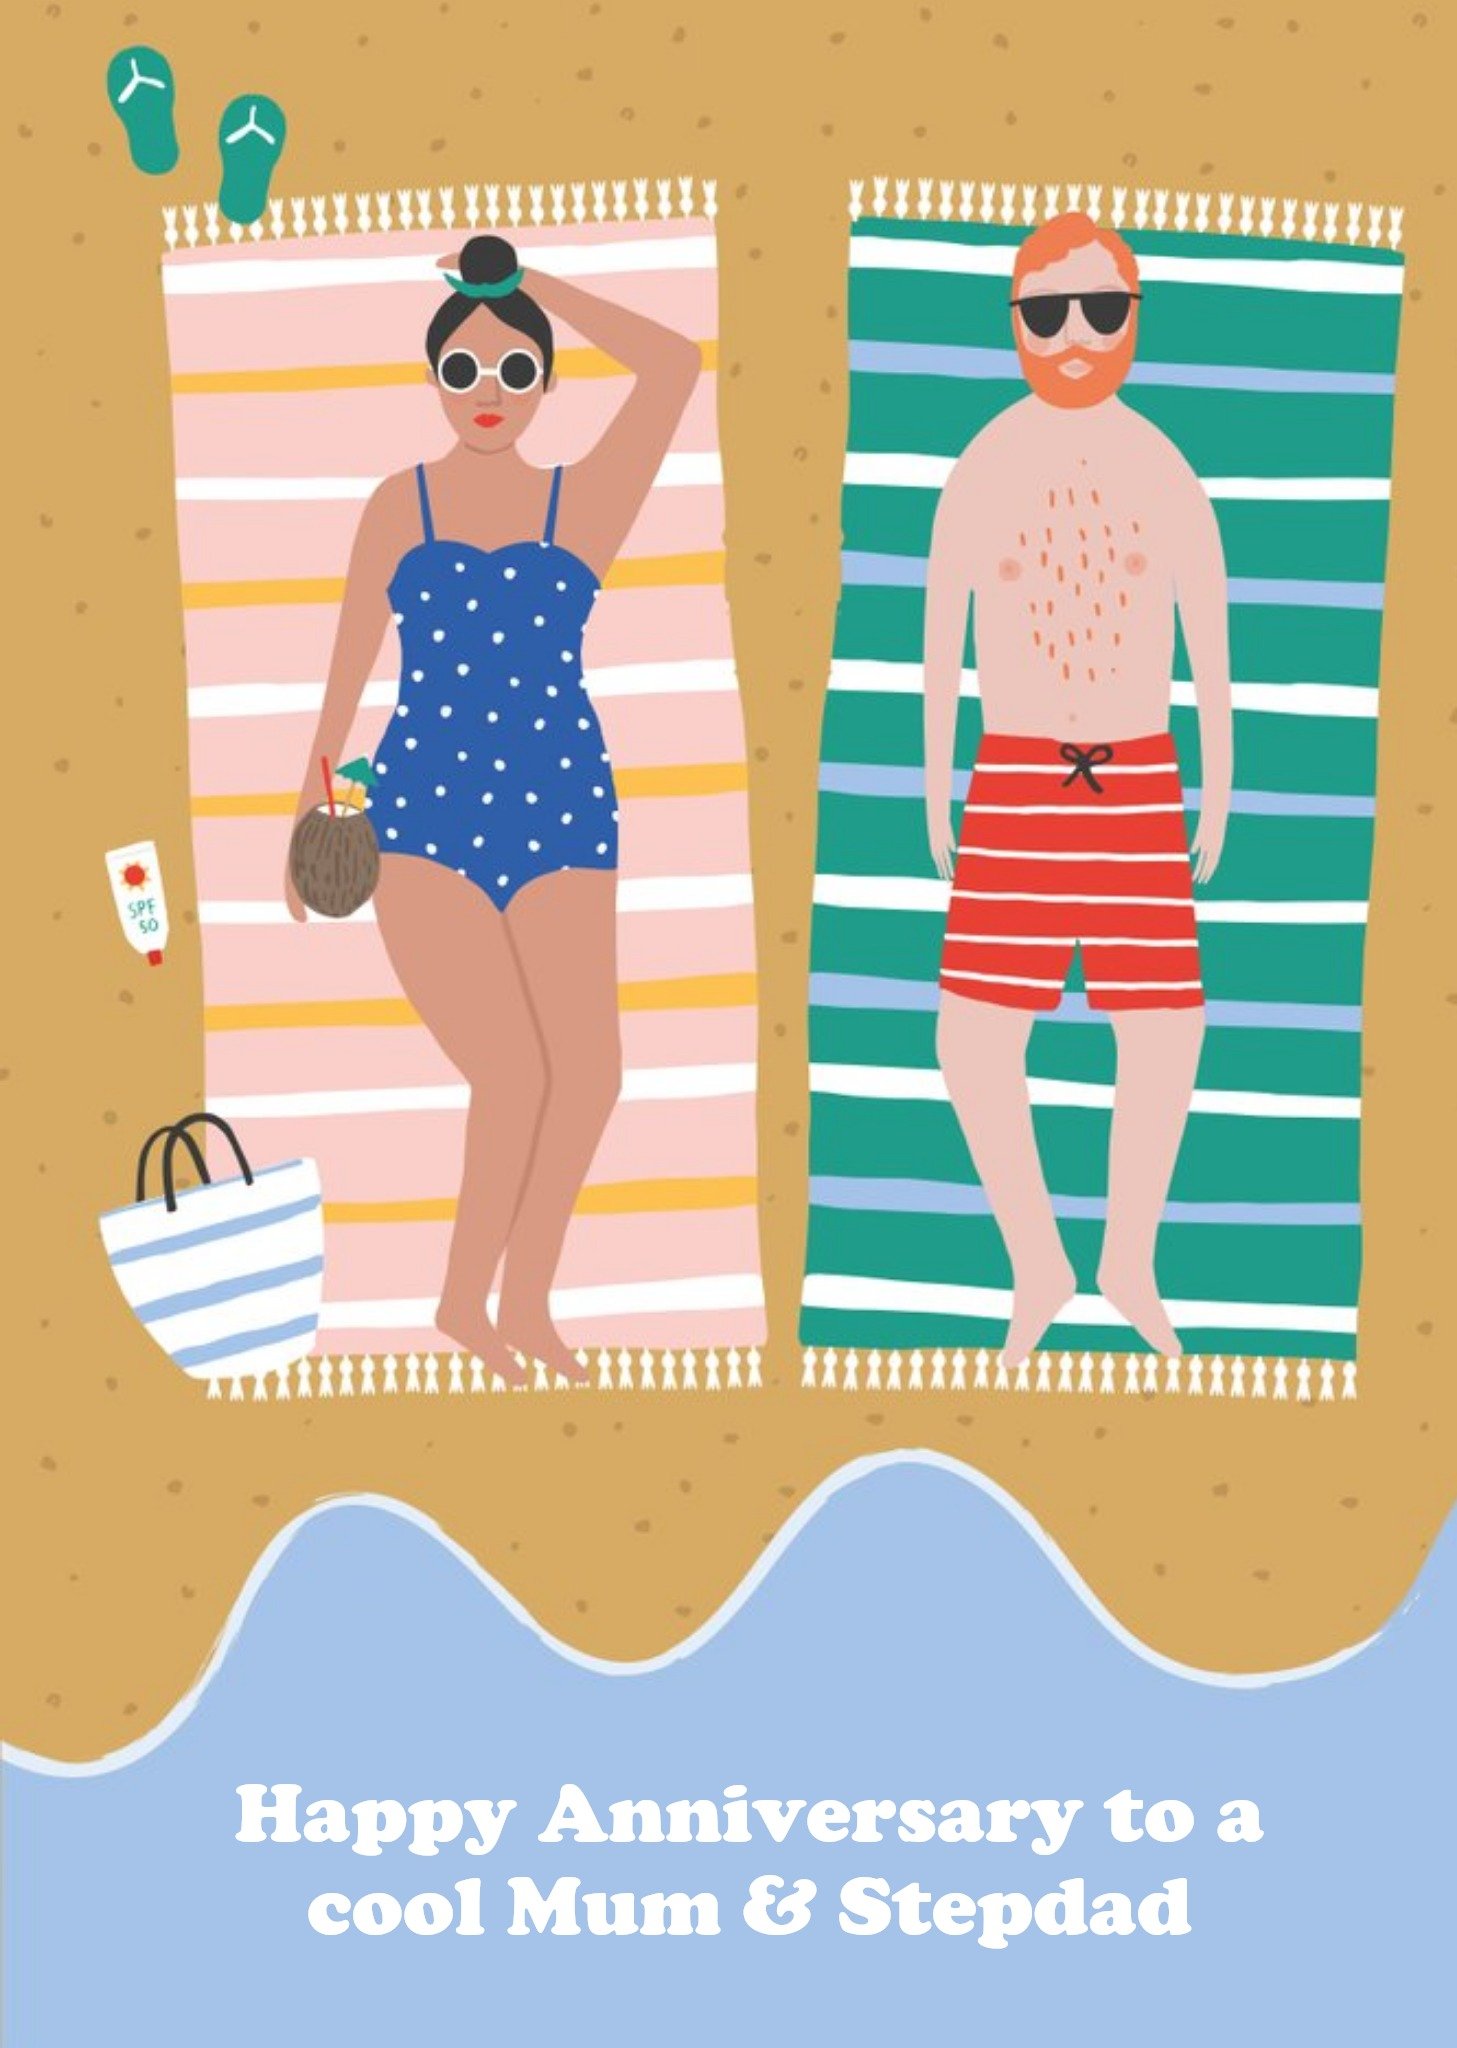 Moonpig Illustration Of A Couple Relaxing On A Beach Anniversary Card Ecard